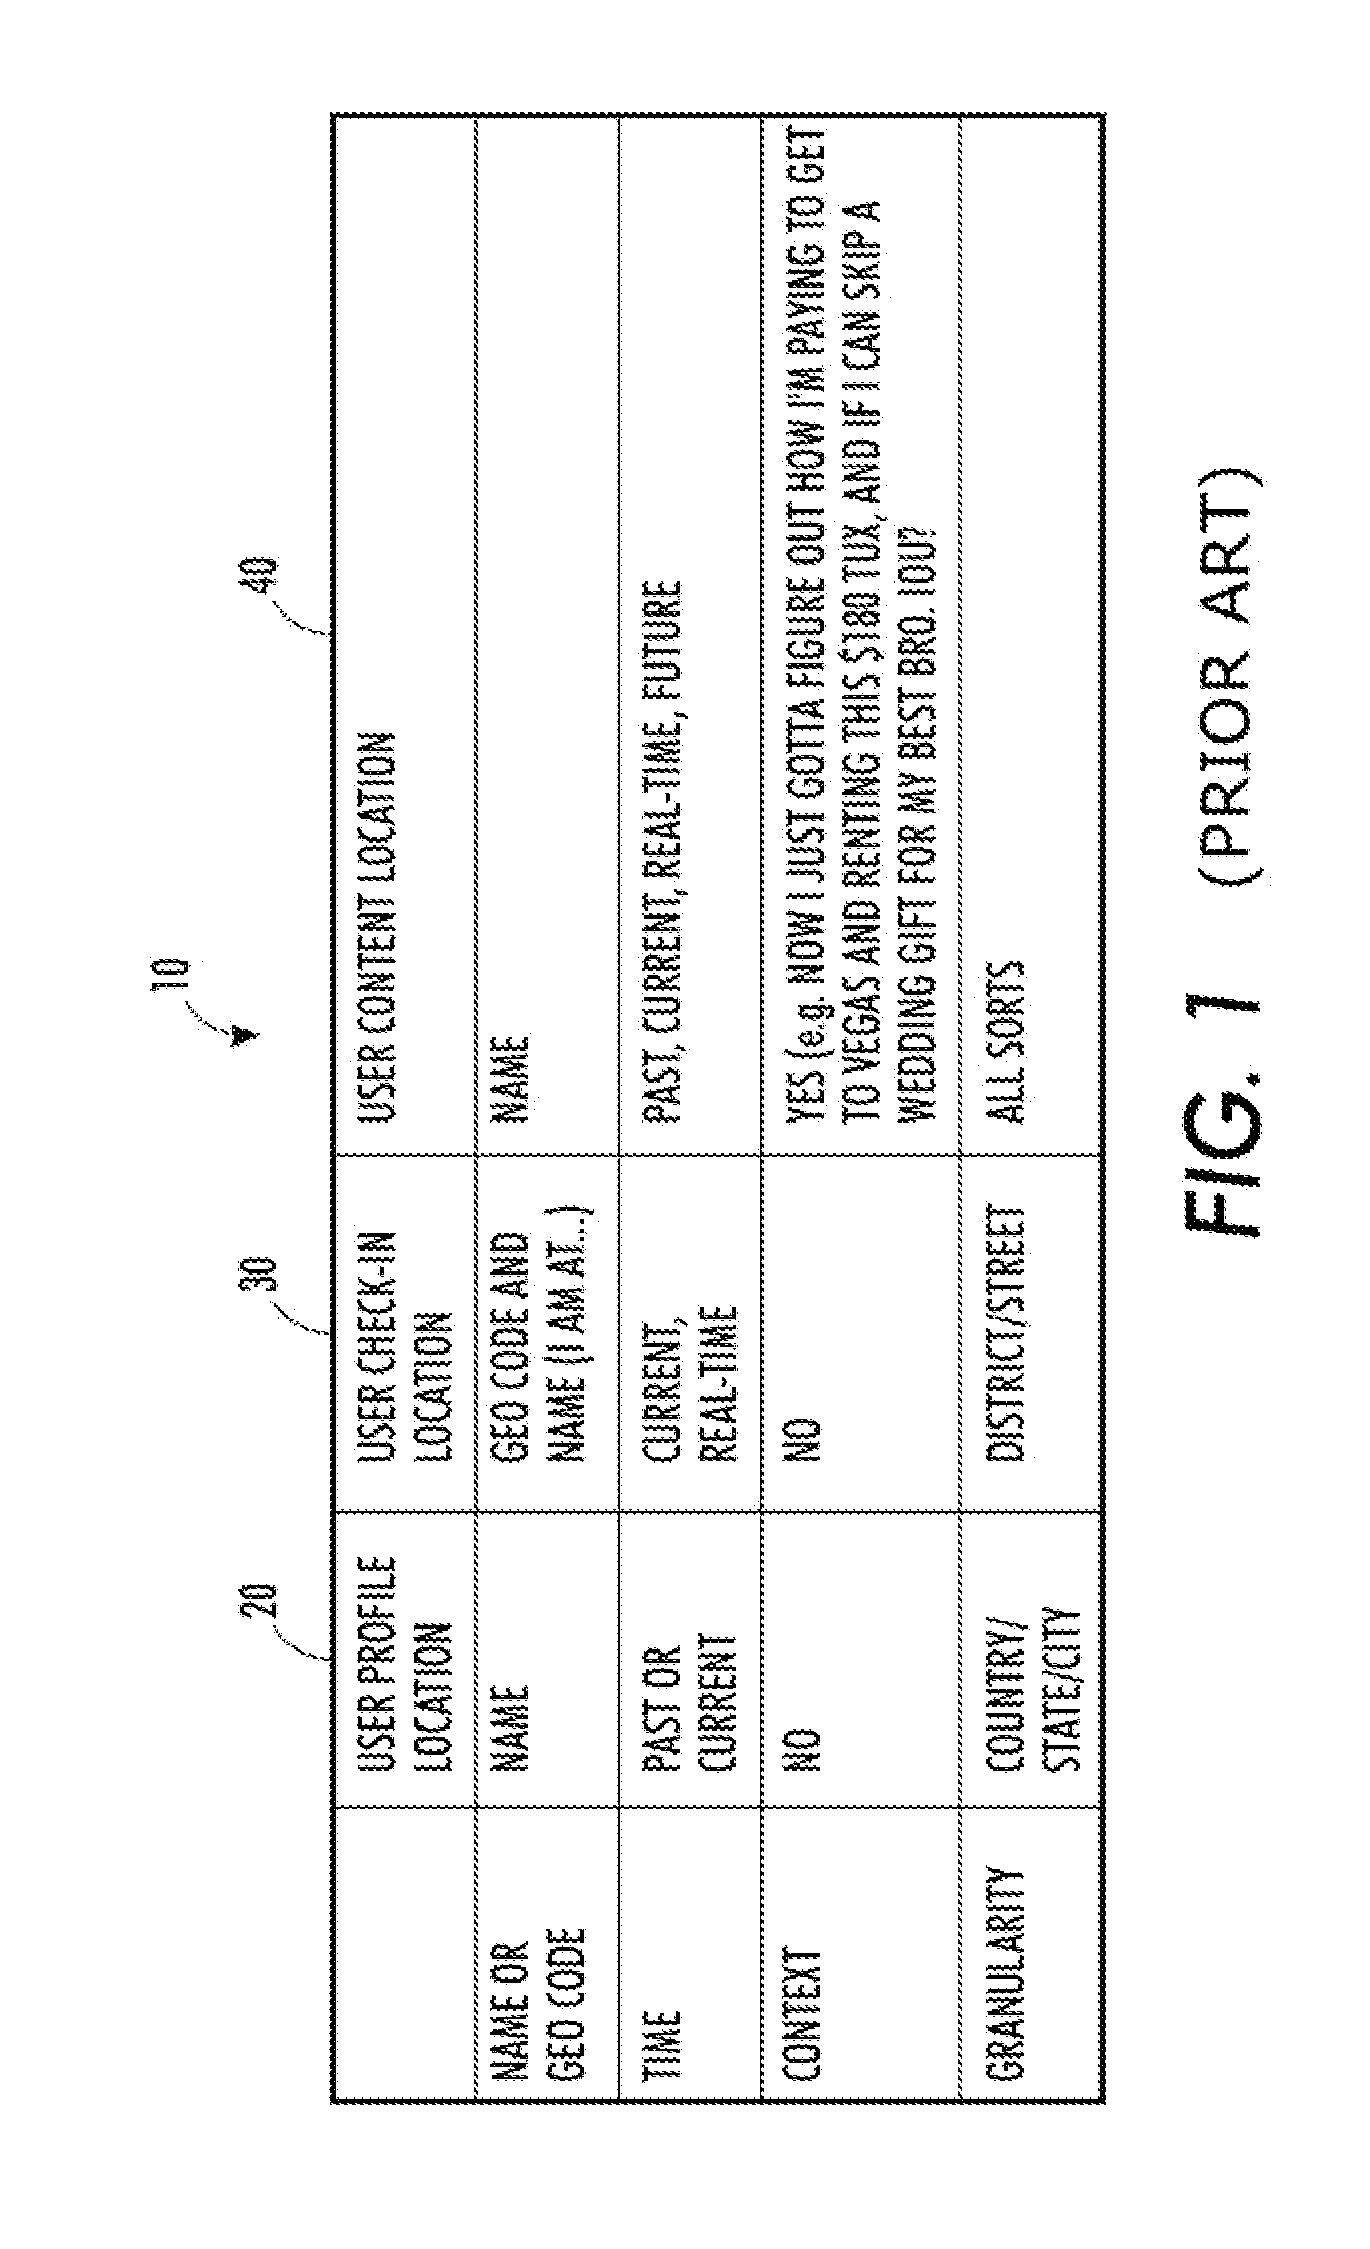 Method and system for extracting and classifying geolocation information utilizing electronic social media